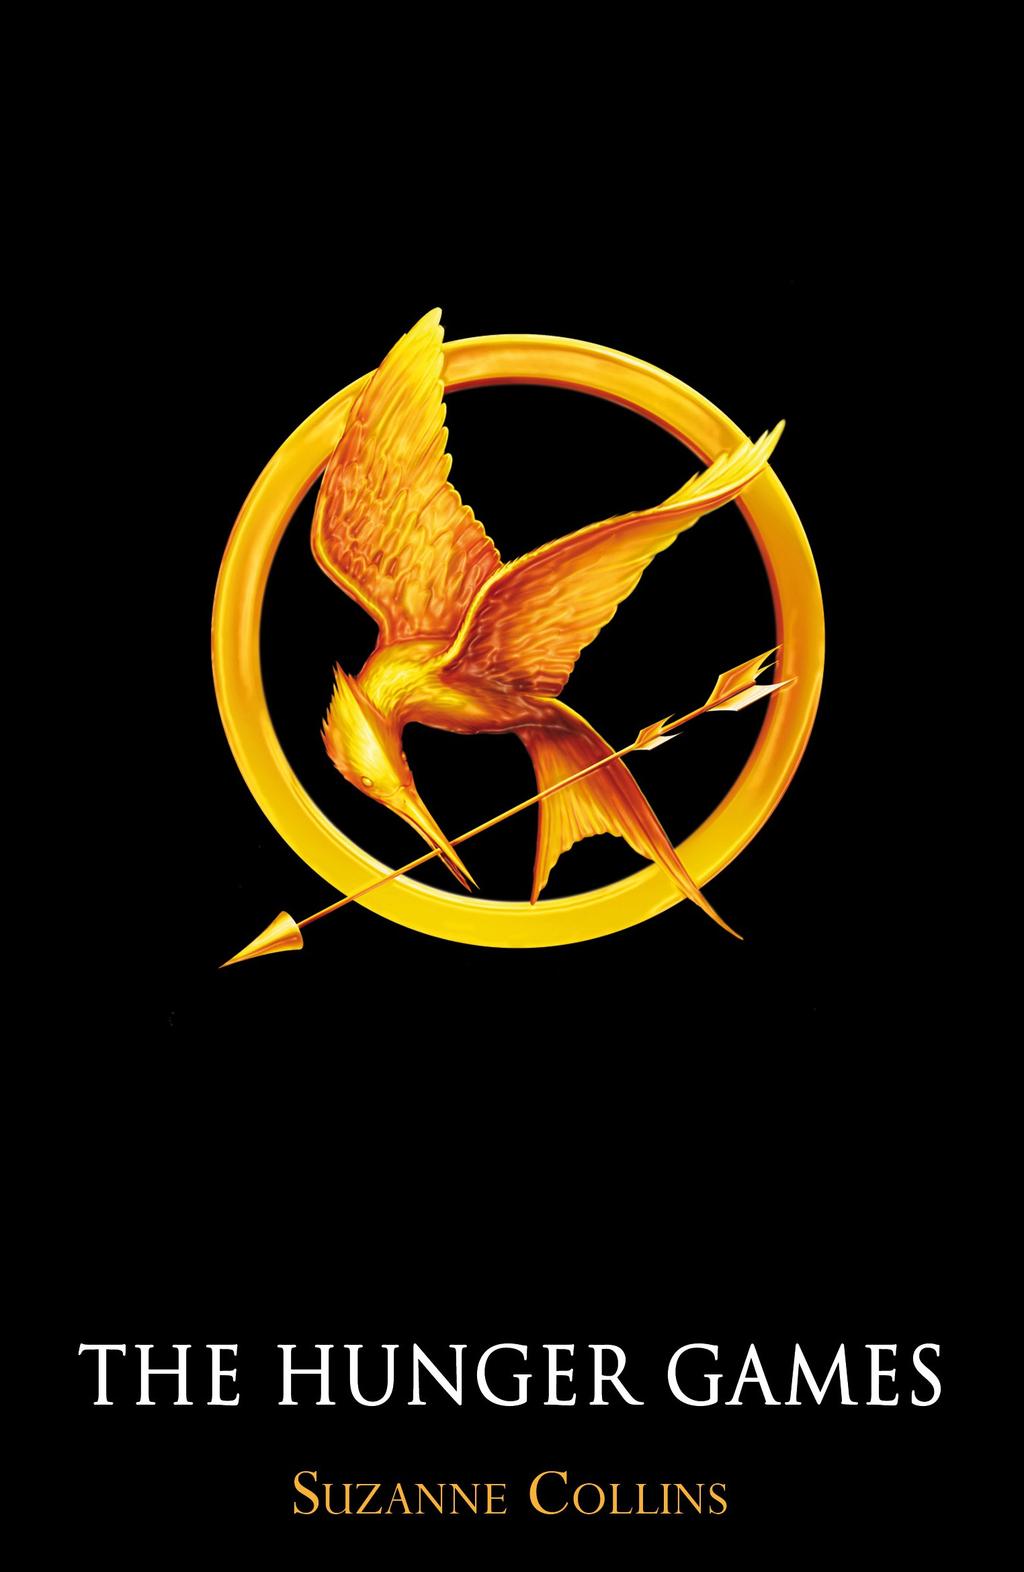 The Hunger Games Comprehension Read this extract from the book: When I was younger, I scared my mother to death, the things I would blurt out about District 12, about the people who rule our country,